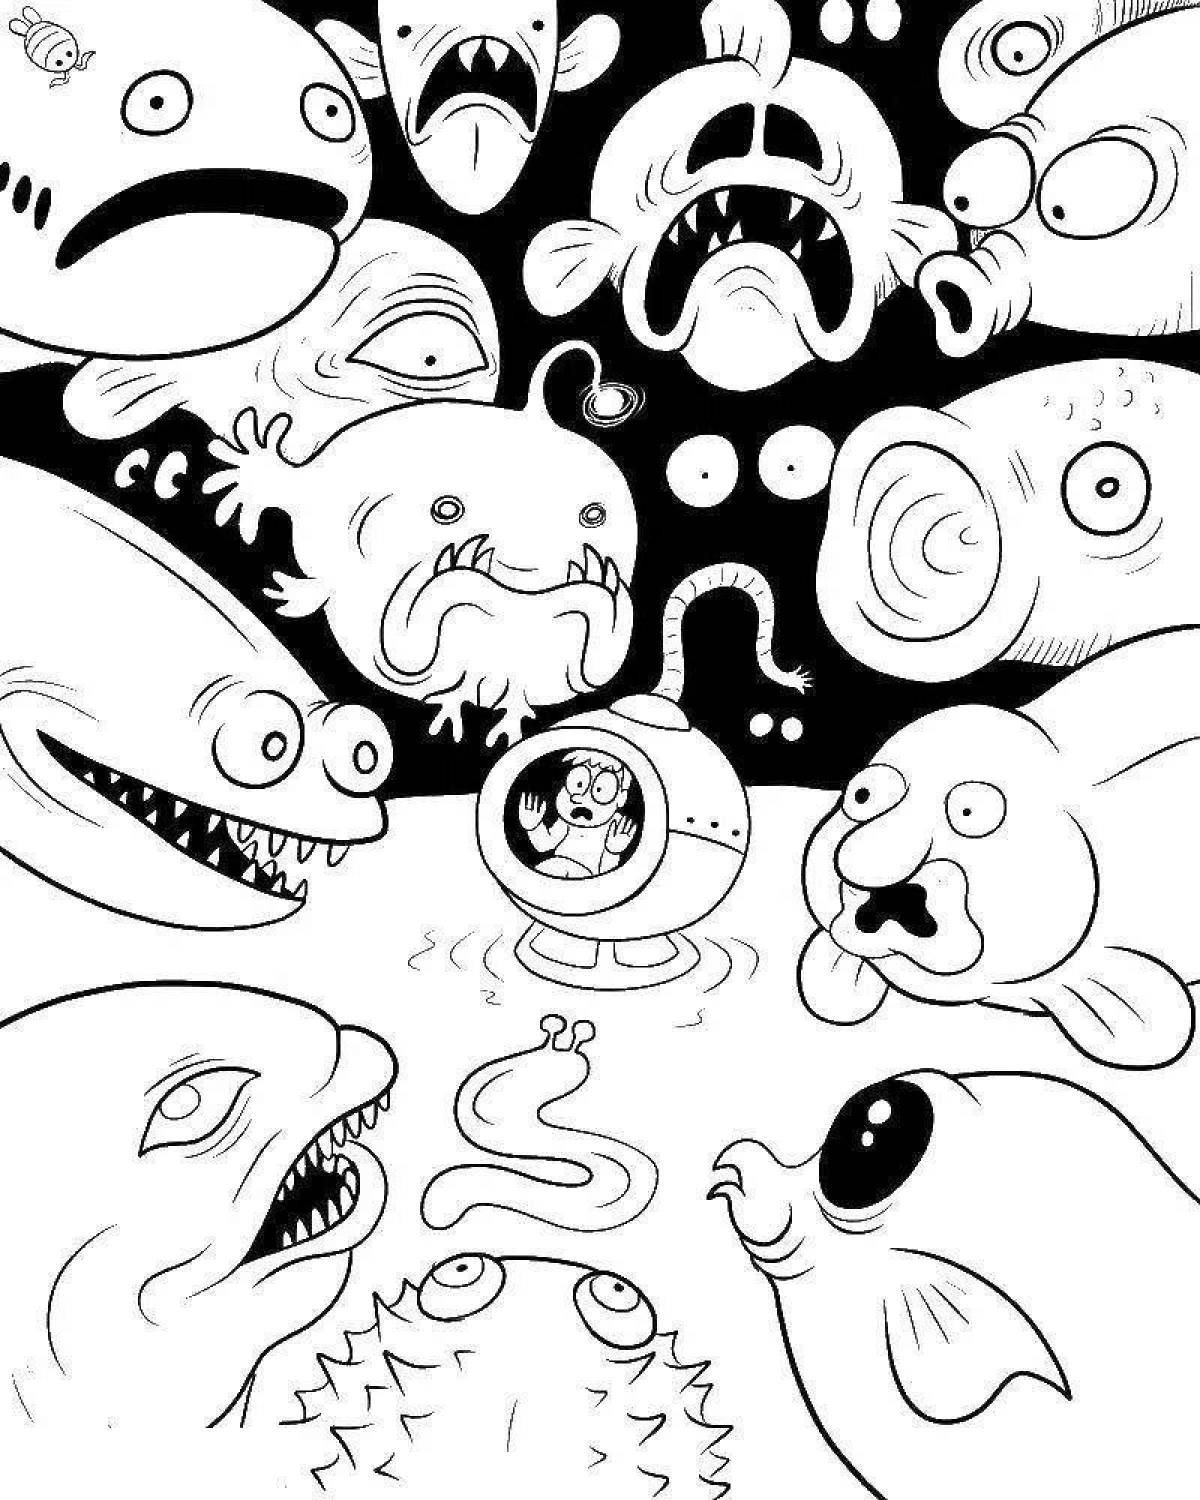 Colourful underwater monsters coloring page